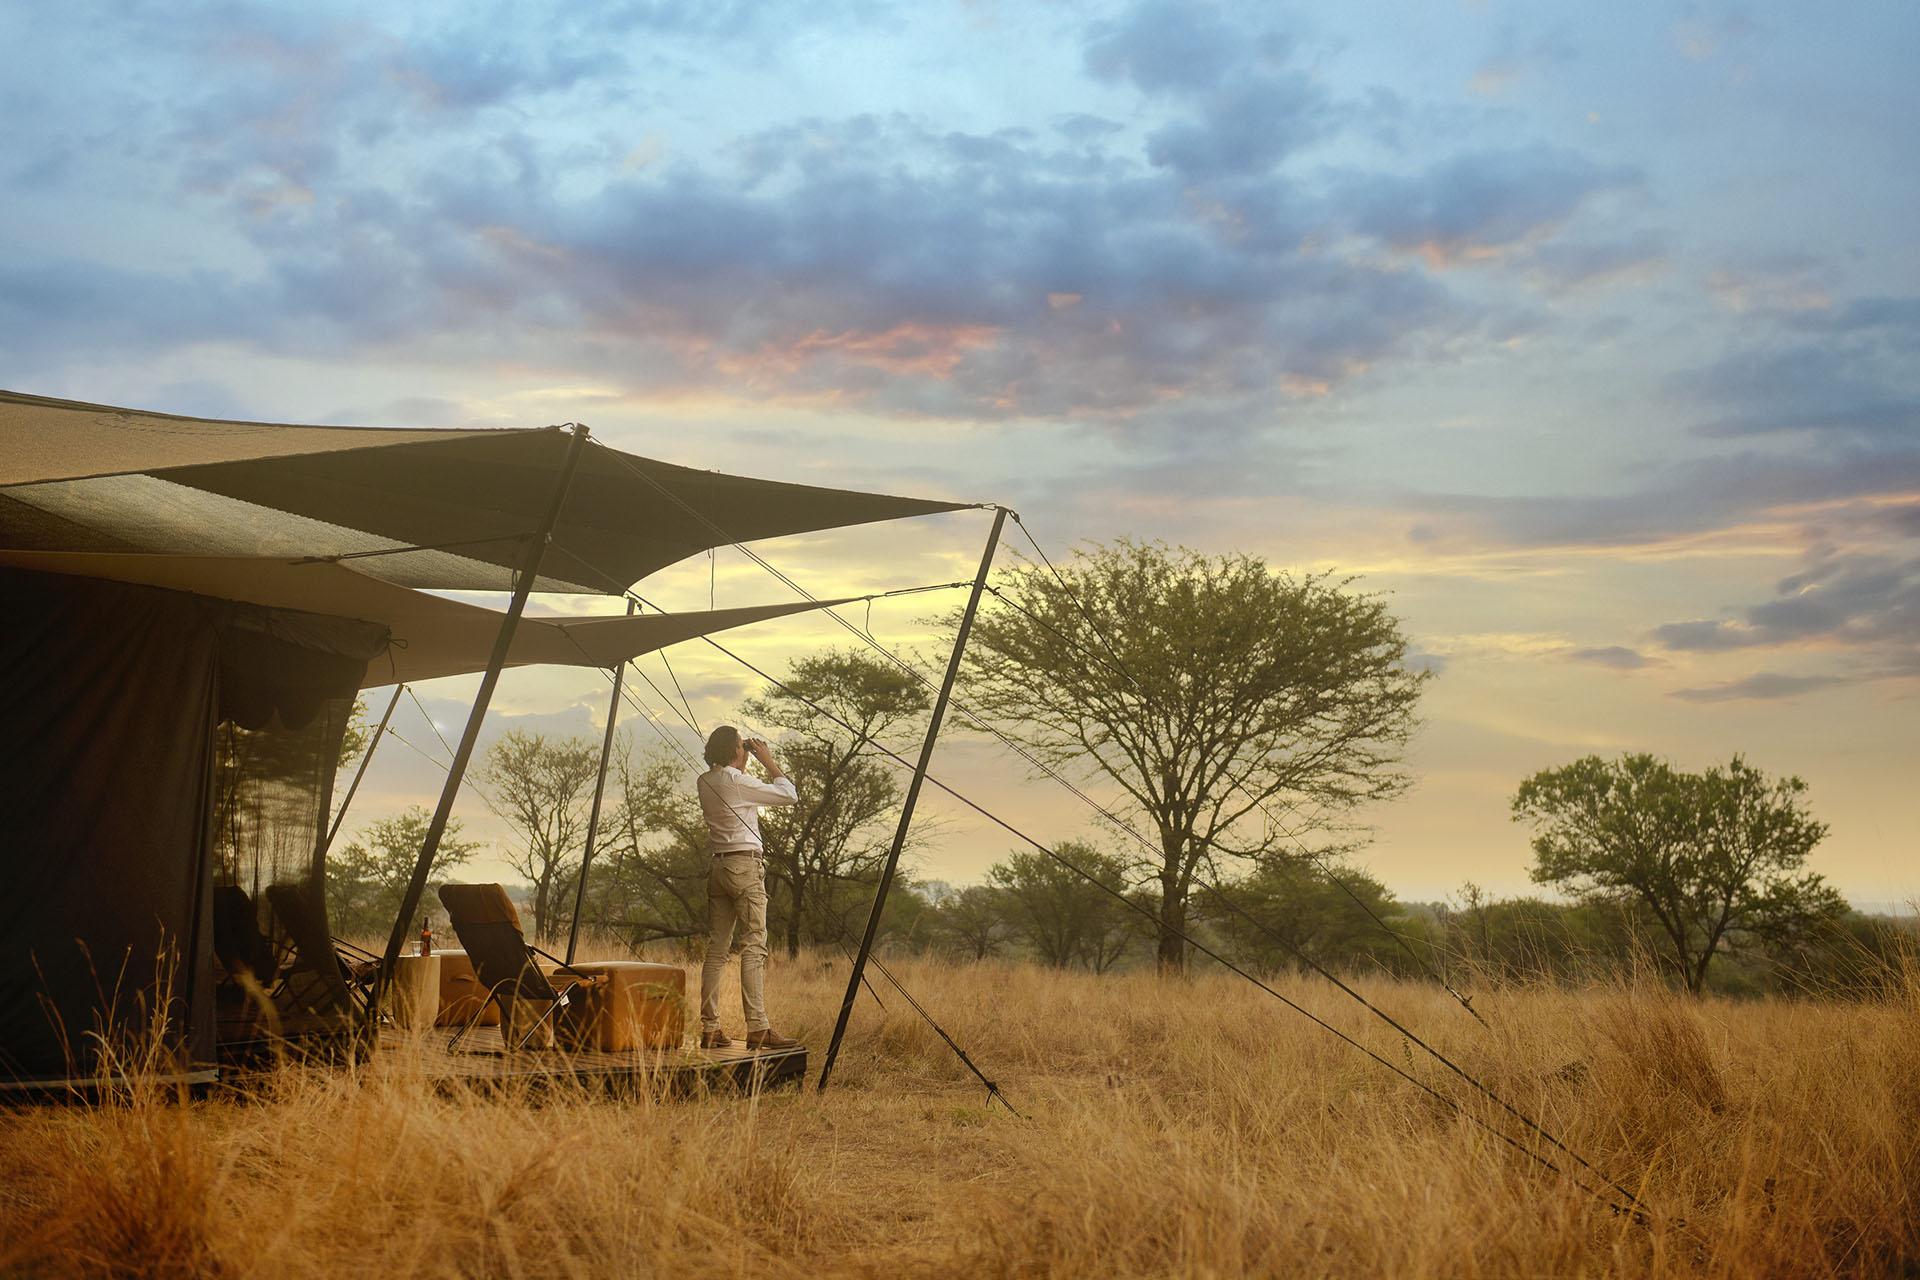 Returning to the roots of safari, where sustainable intimate mobile camps move in symbiosis with the great migrations, the Siringit Migration Camp brings five-star luxury to the mobile safari experience